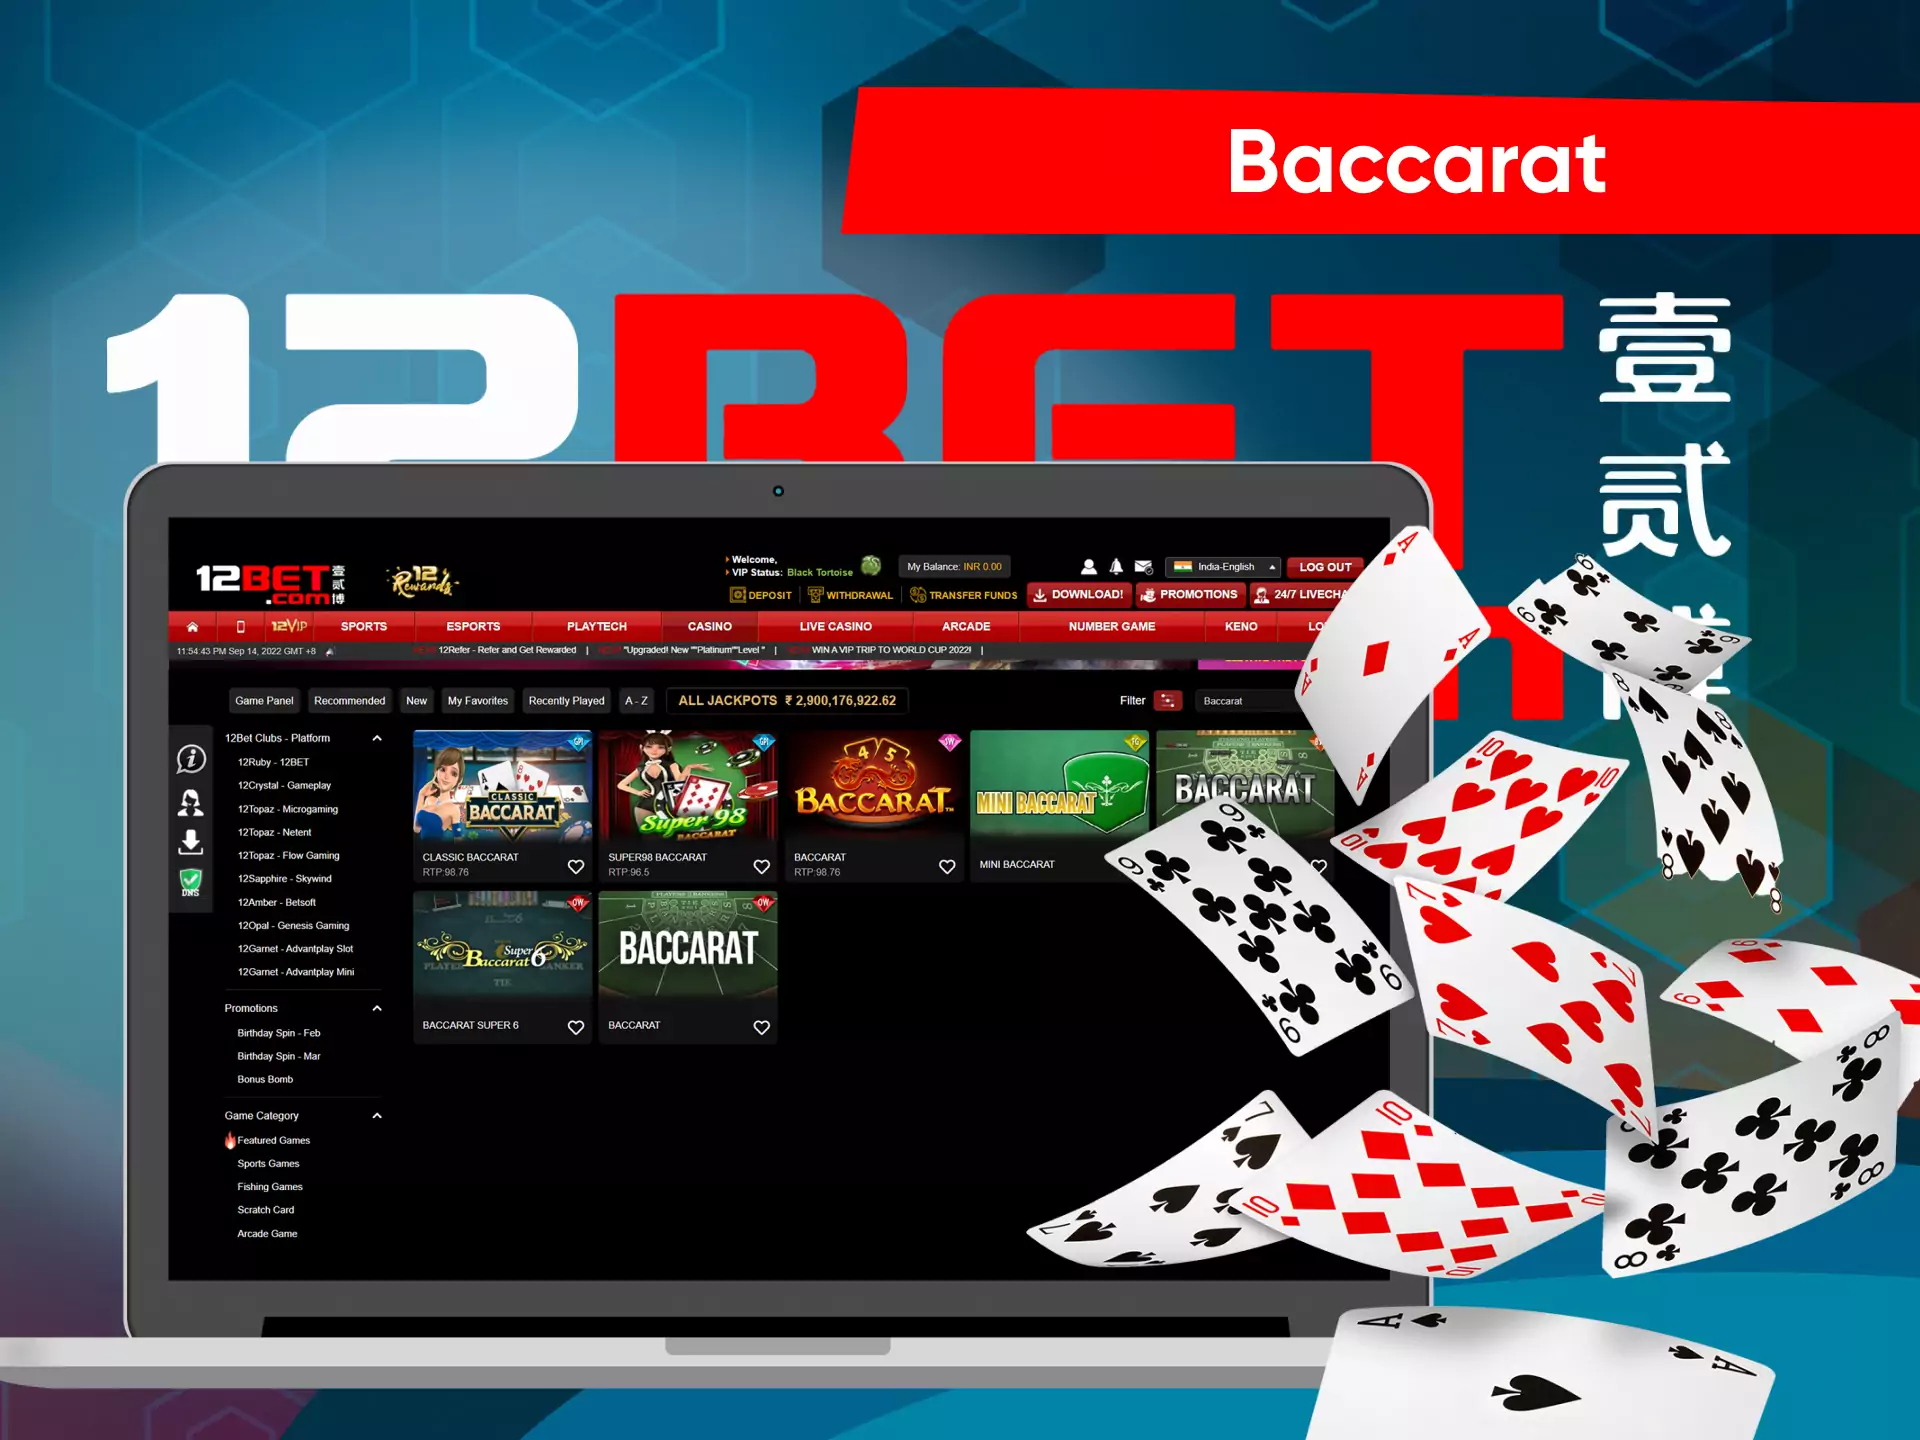 Visit the 12bet casino and play baccarat online.